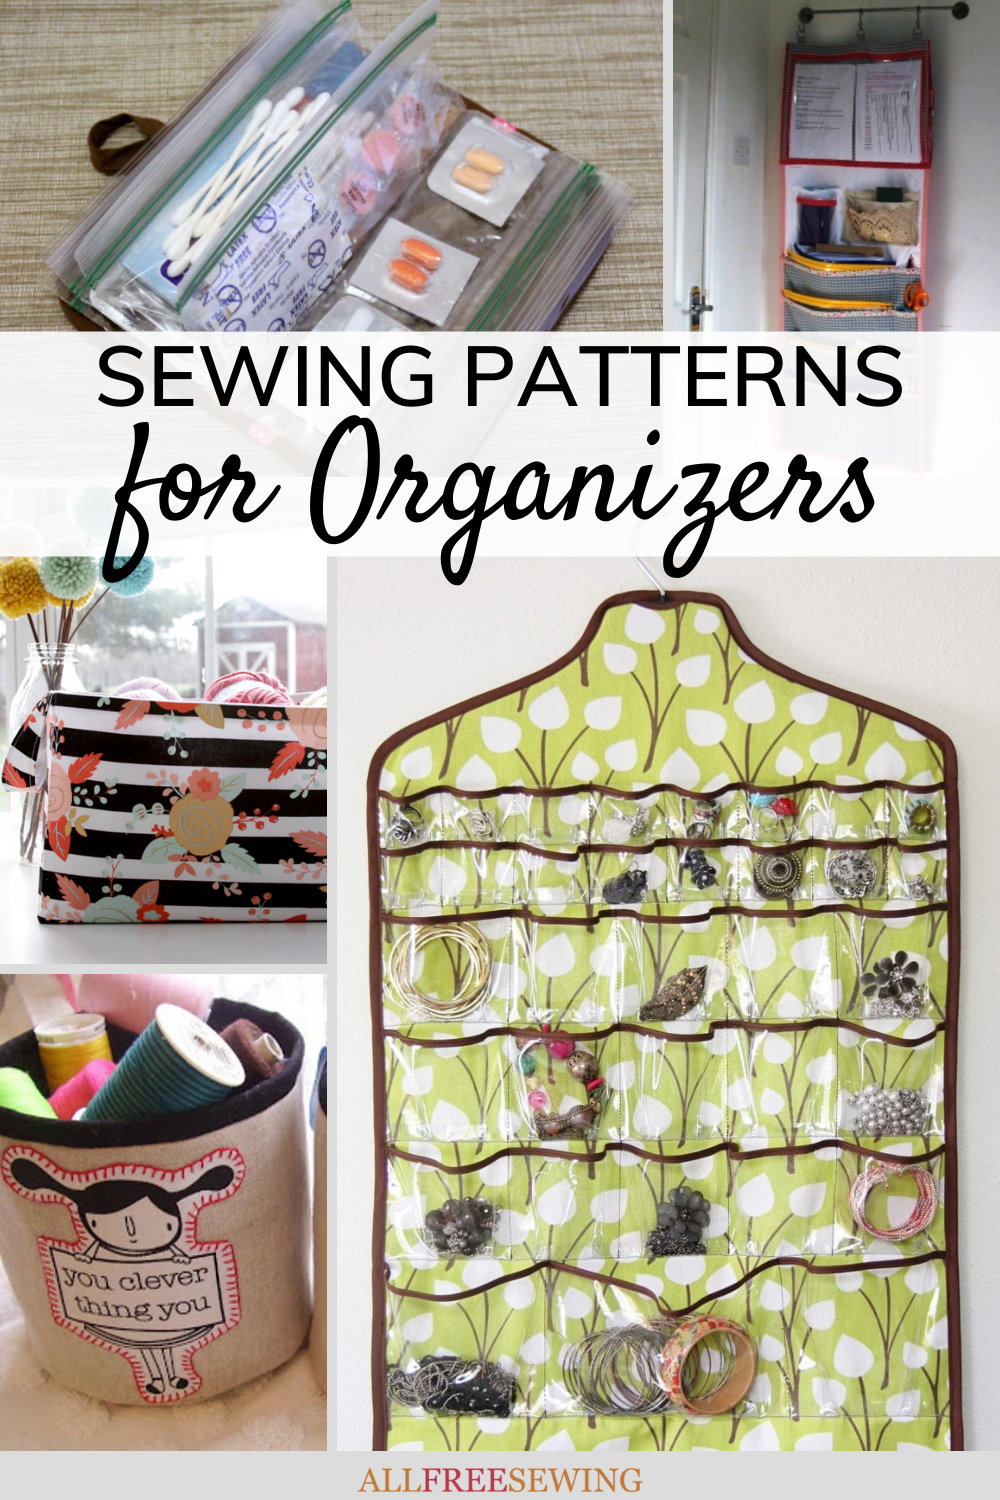 The Amazing A-Frame Organizer with cut out handles: free sewing pattern